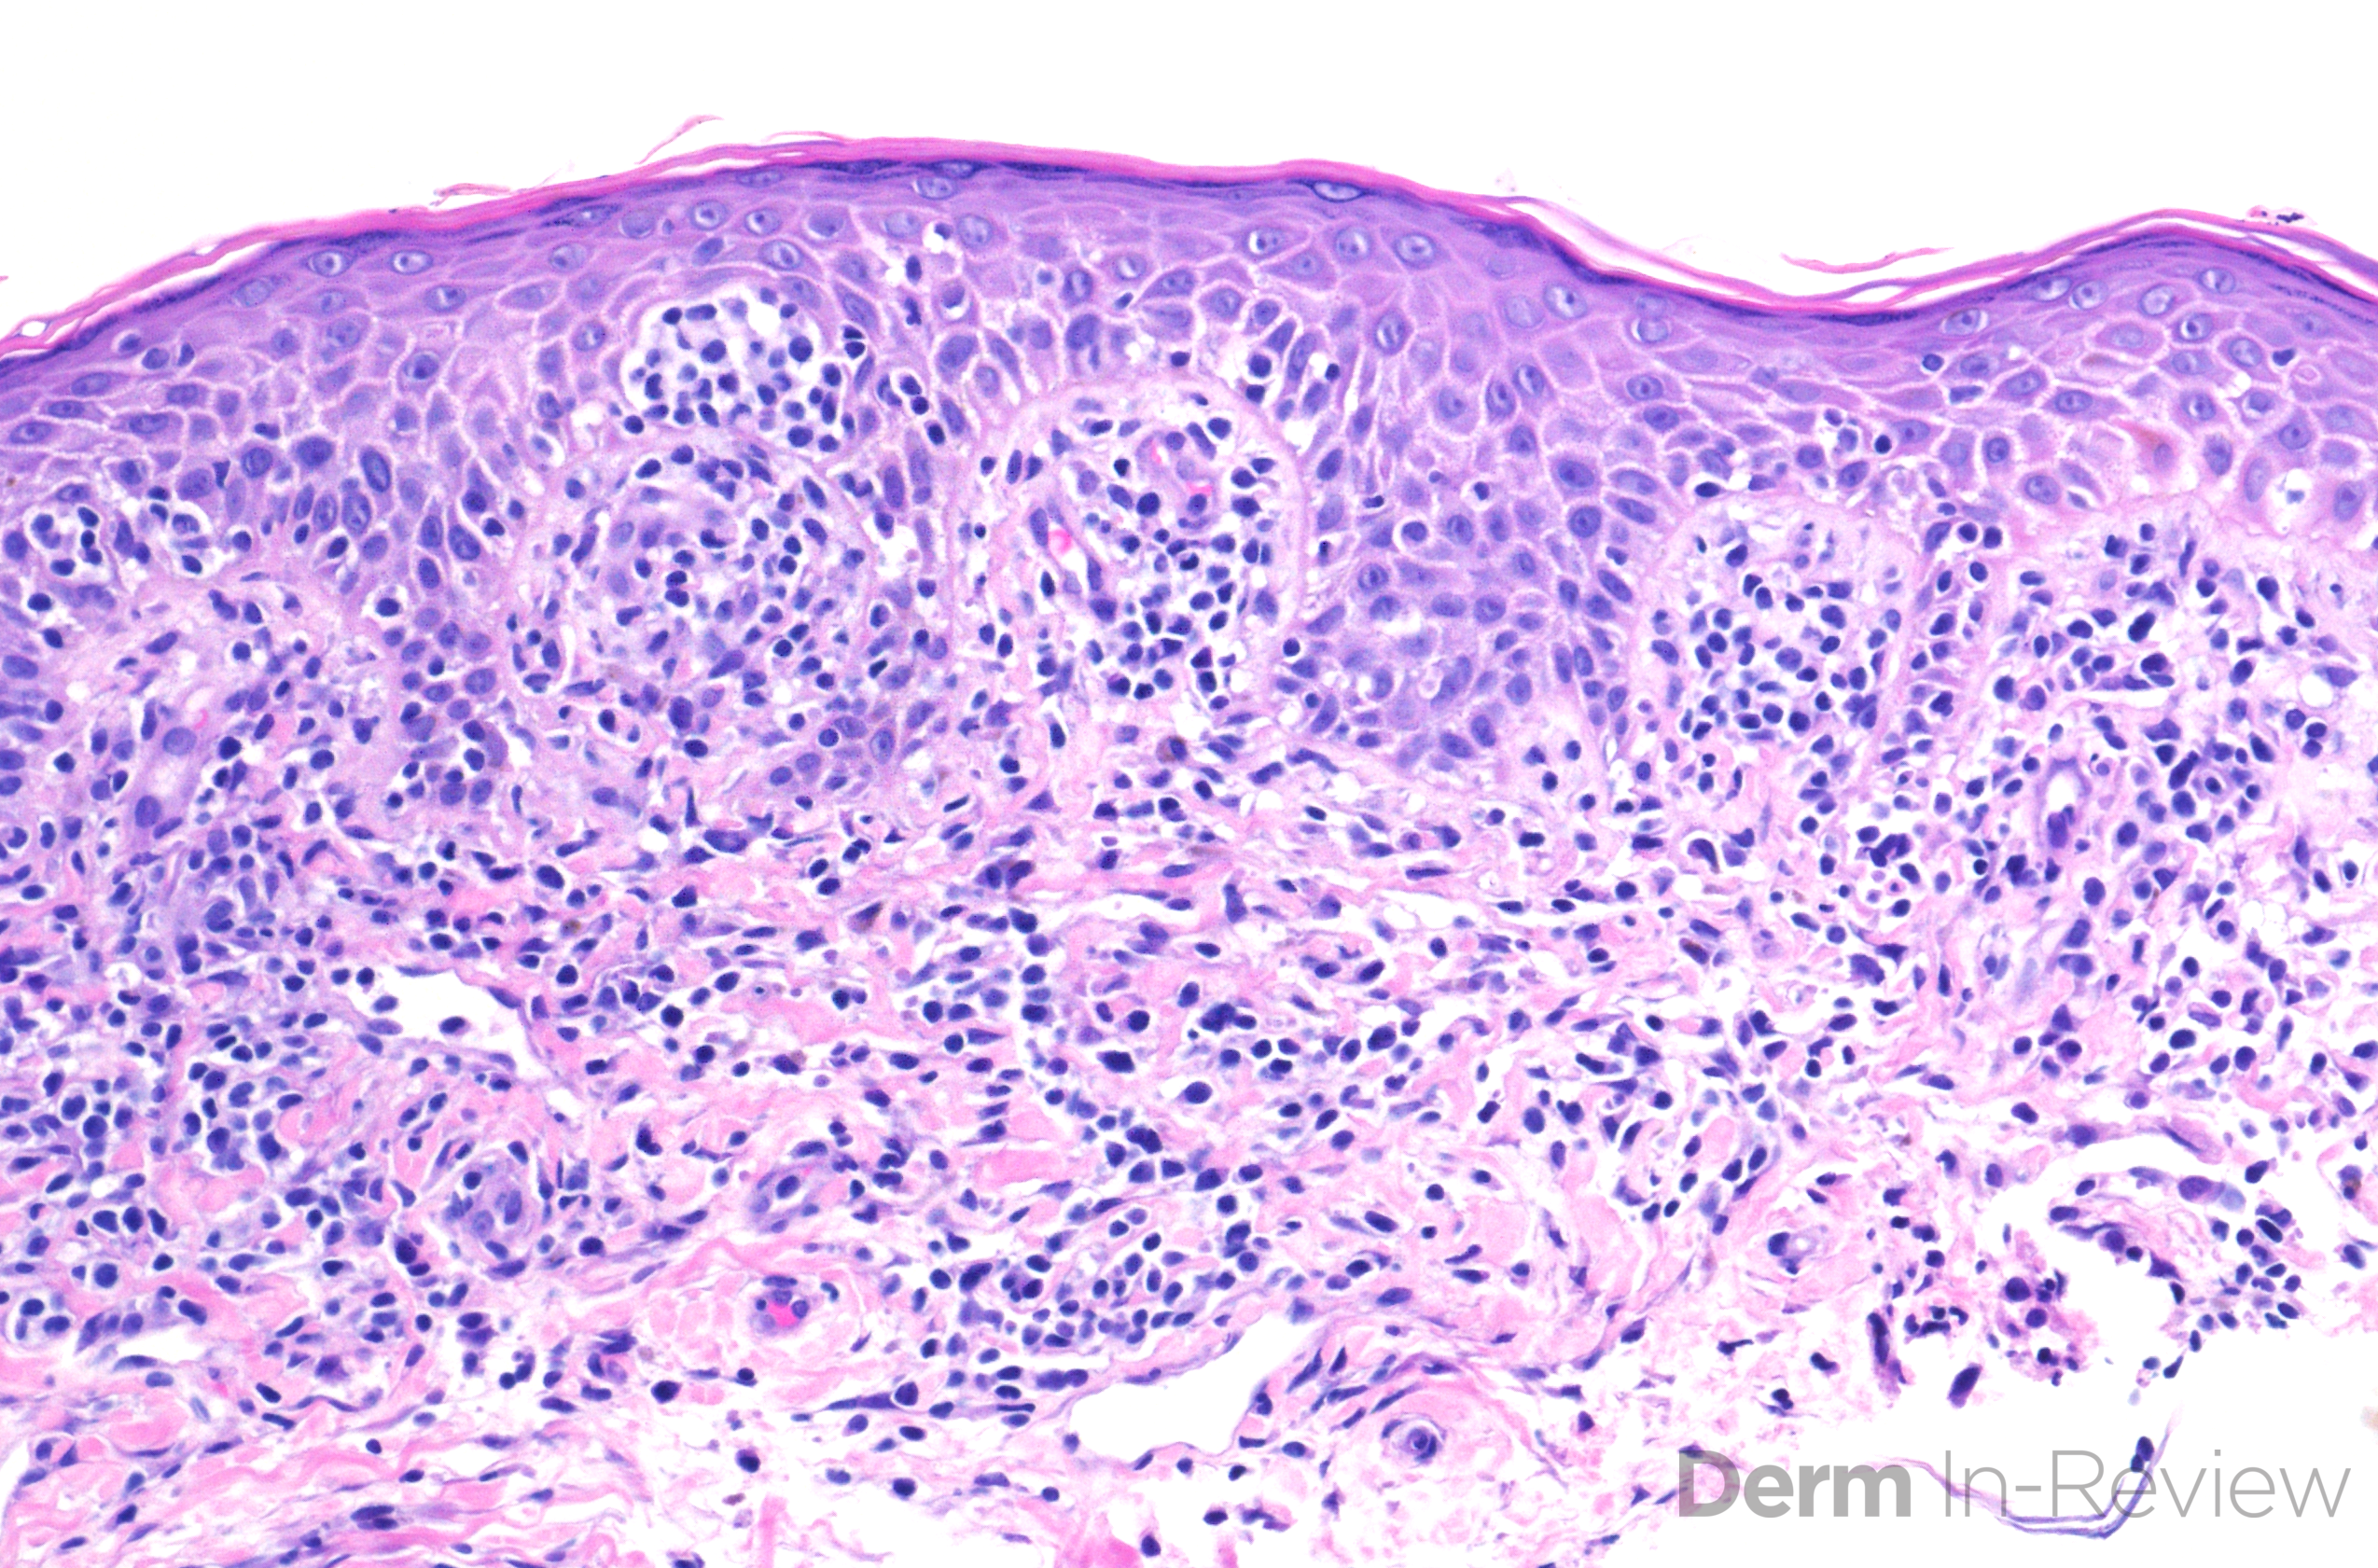 3.11 mycosis fungoides